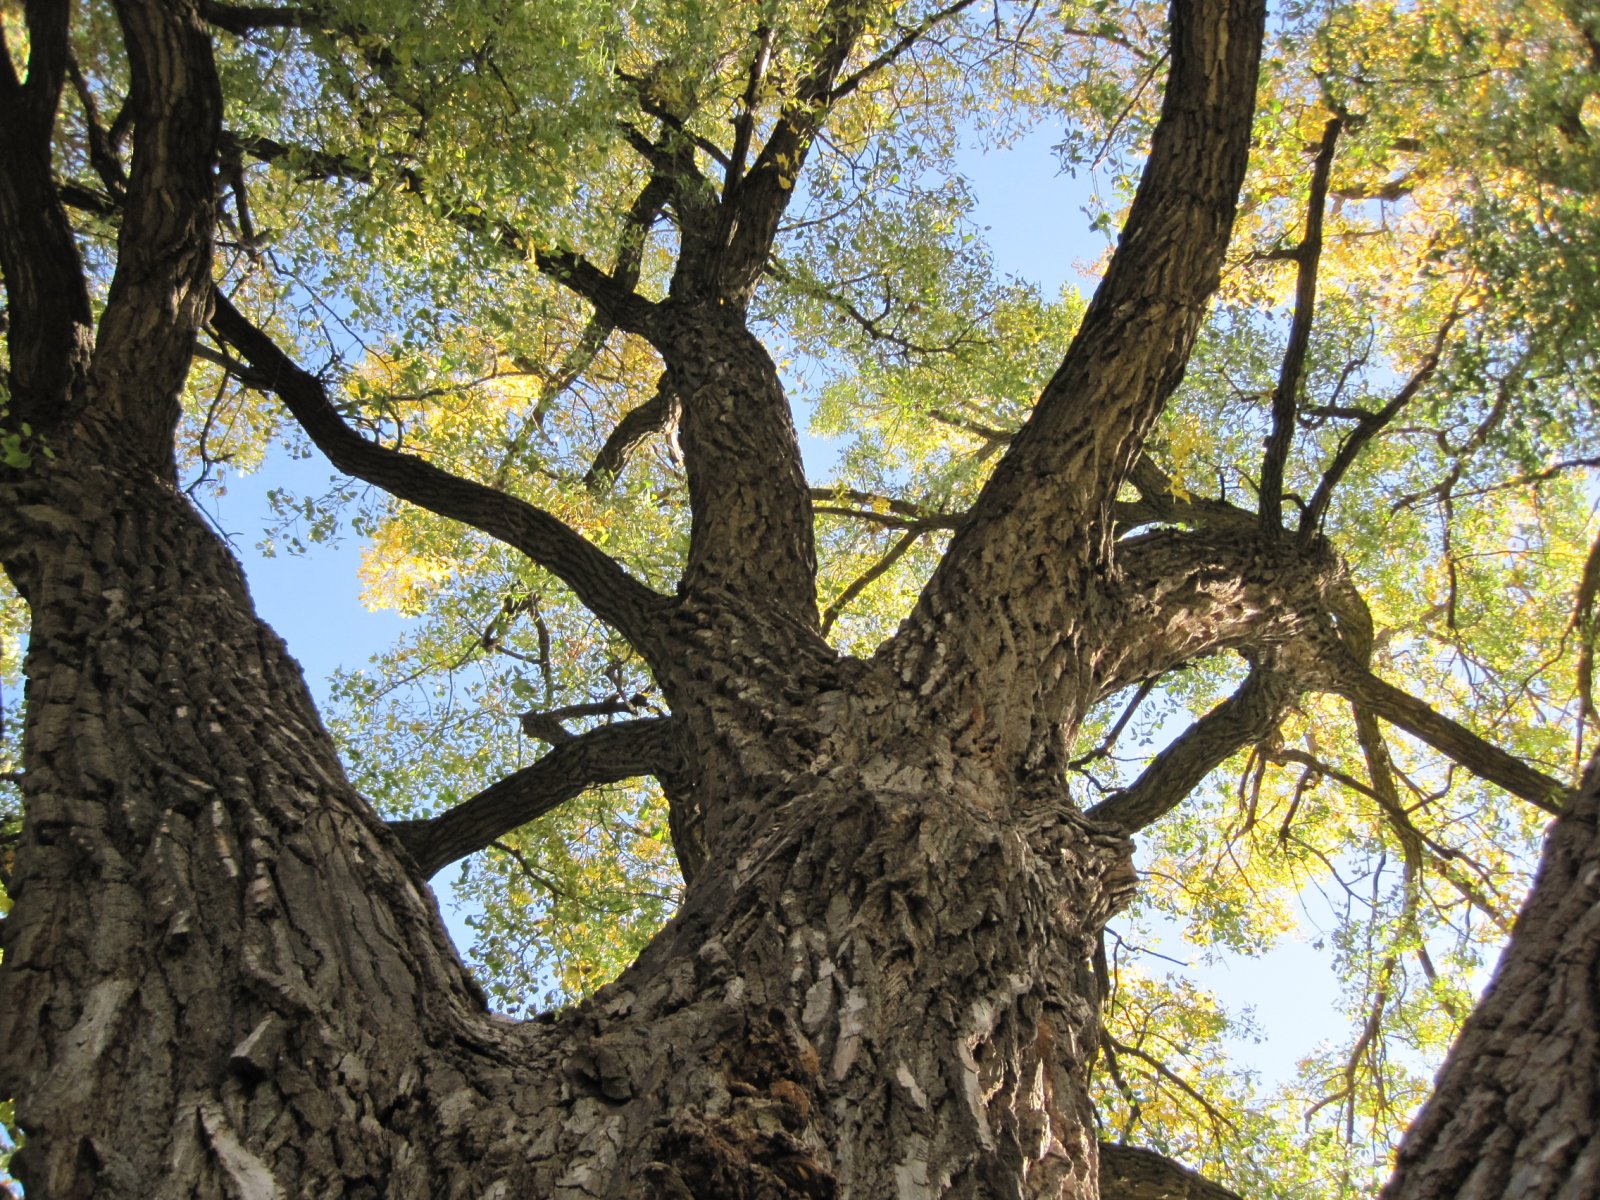 looking up into the tree canopy of a cottonwood